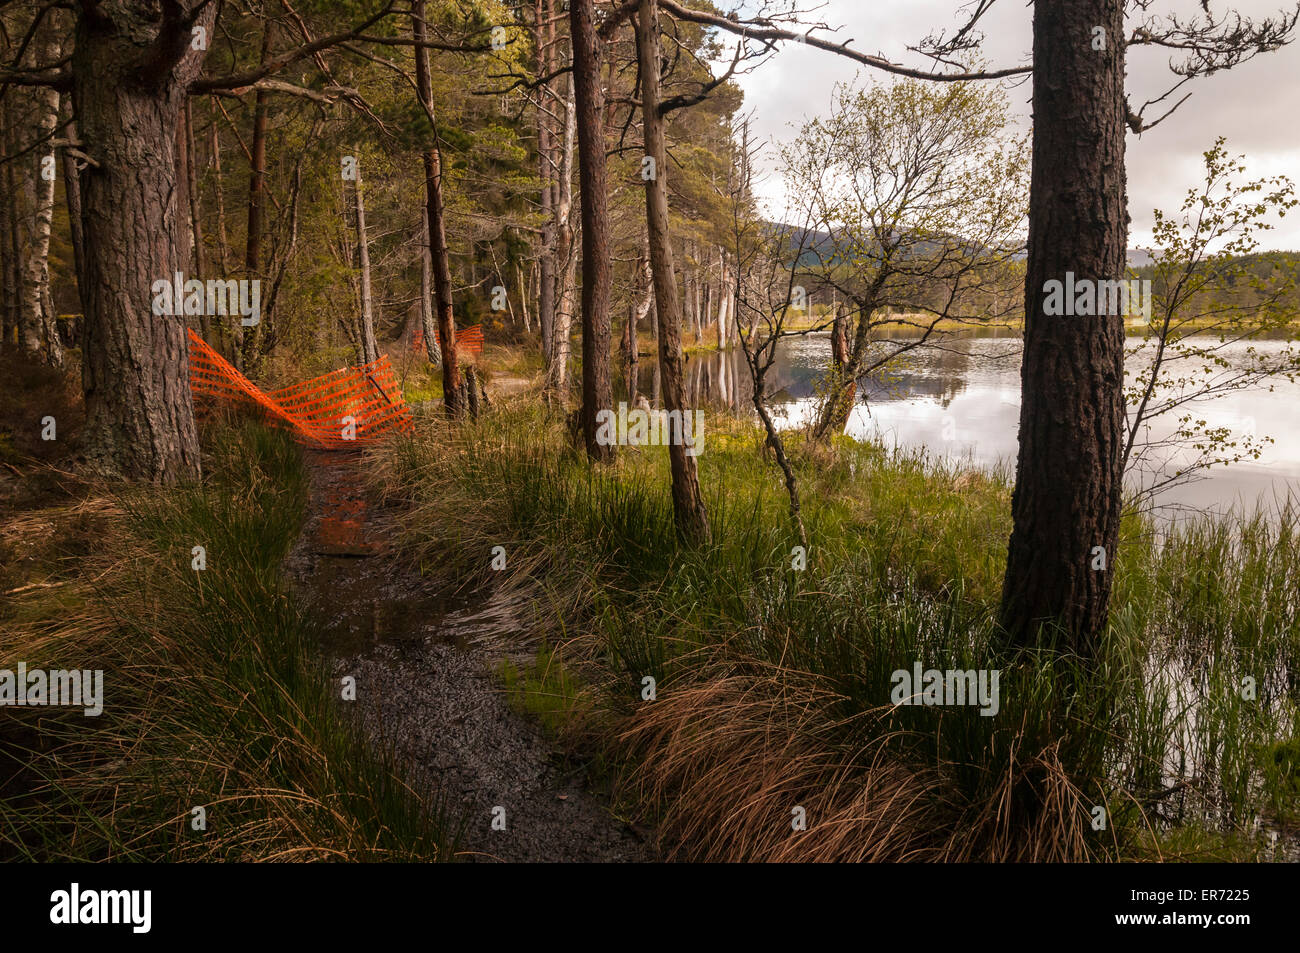 The White footpath closed due to rising loch waters at Uath Lochan, Inshraic Forest, Strathspey, Scotland Stock Photo